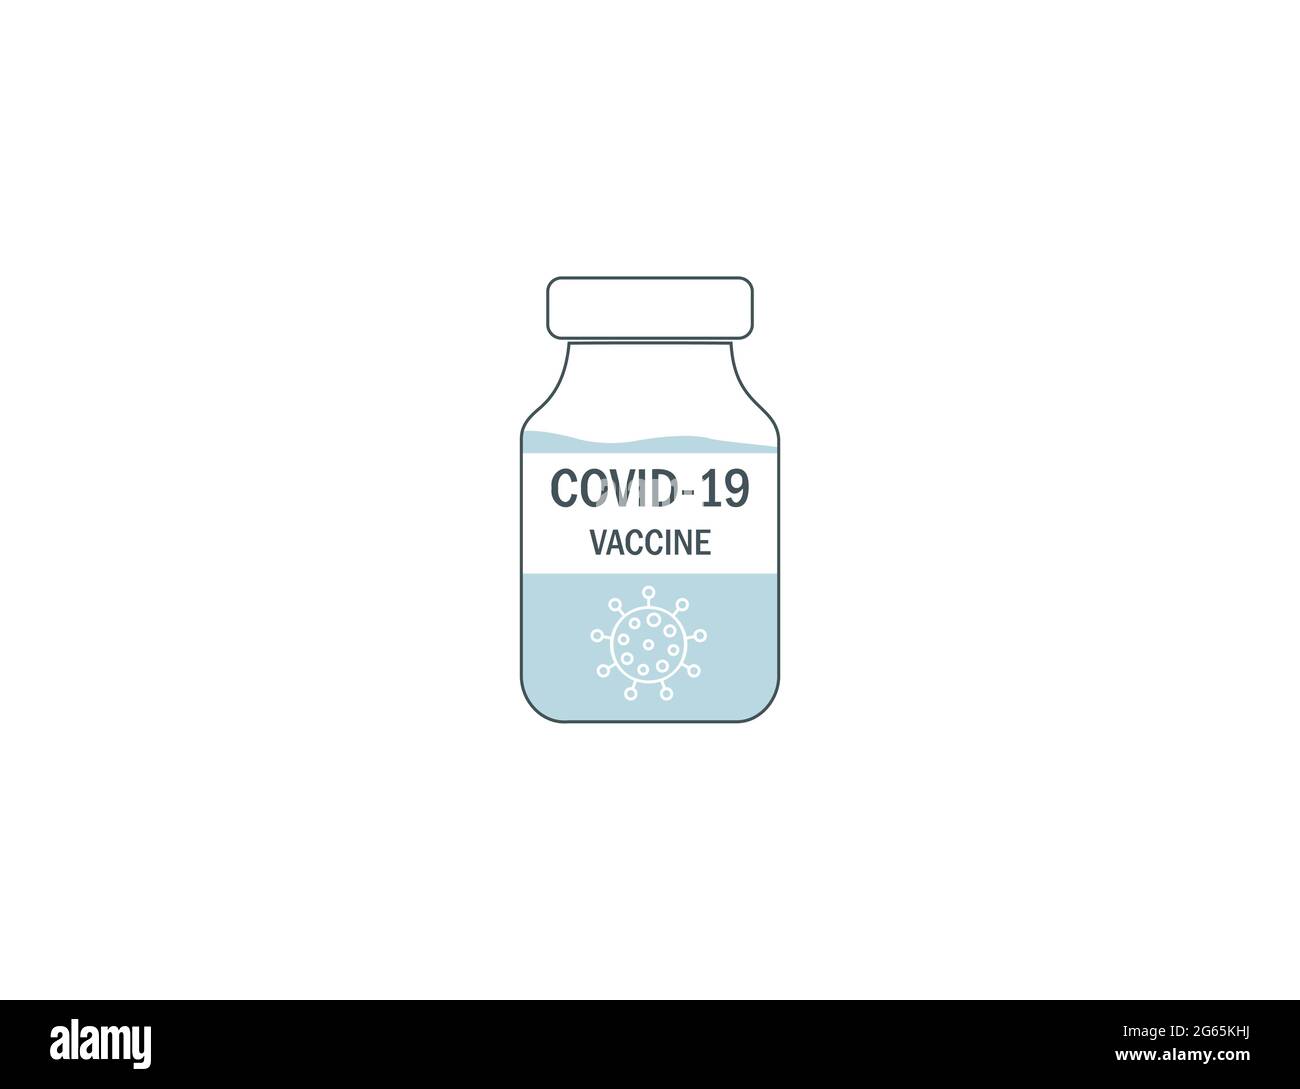 Covid-19. Vaccination, injection, inoculation icon. Vector illustration. flat design. Stock Vector